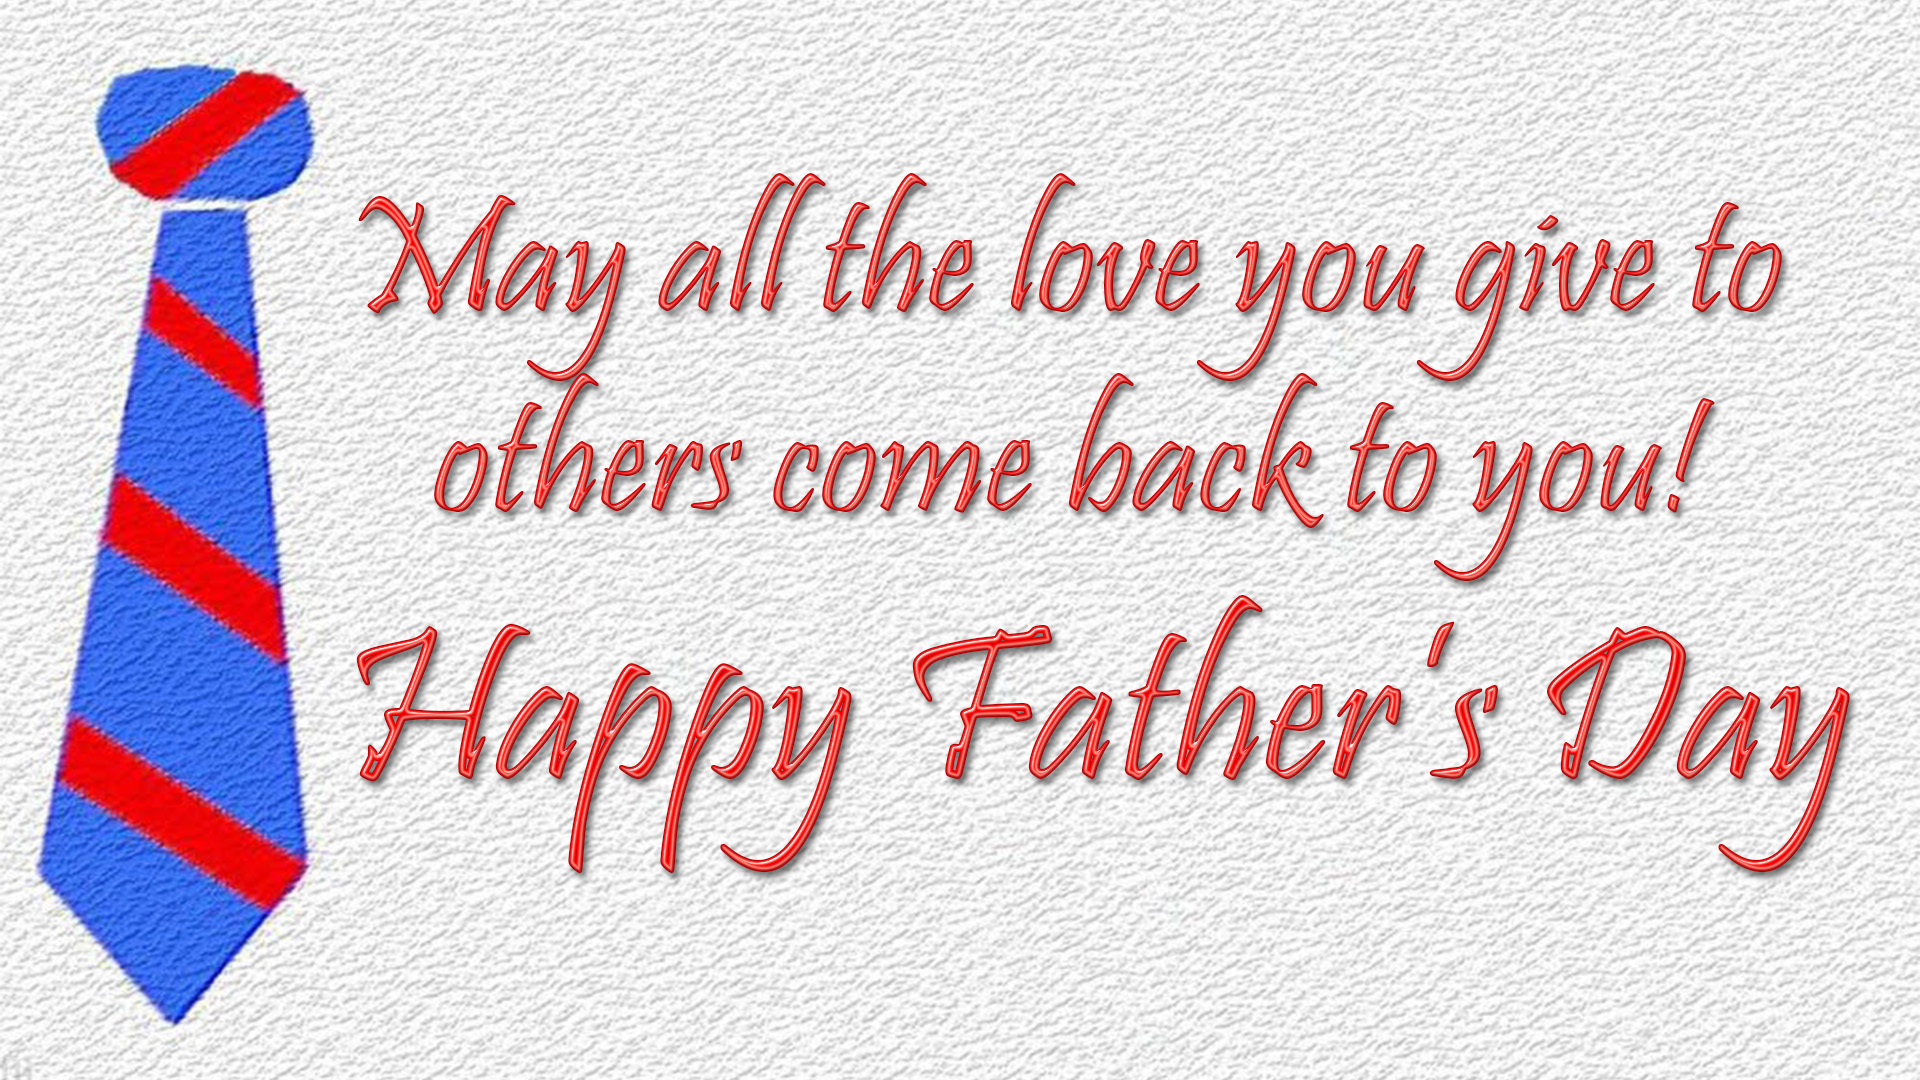 happy fathers day wishes 2018